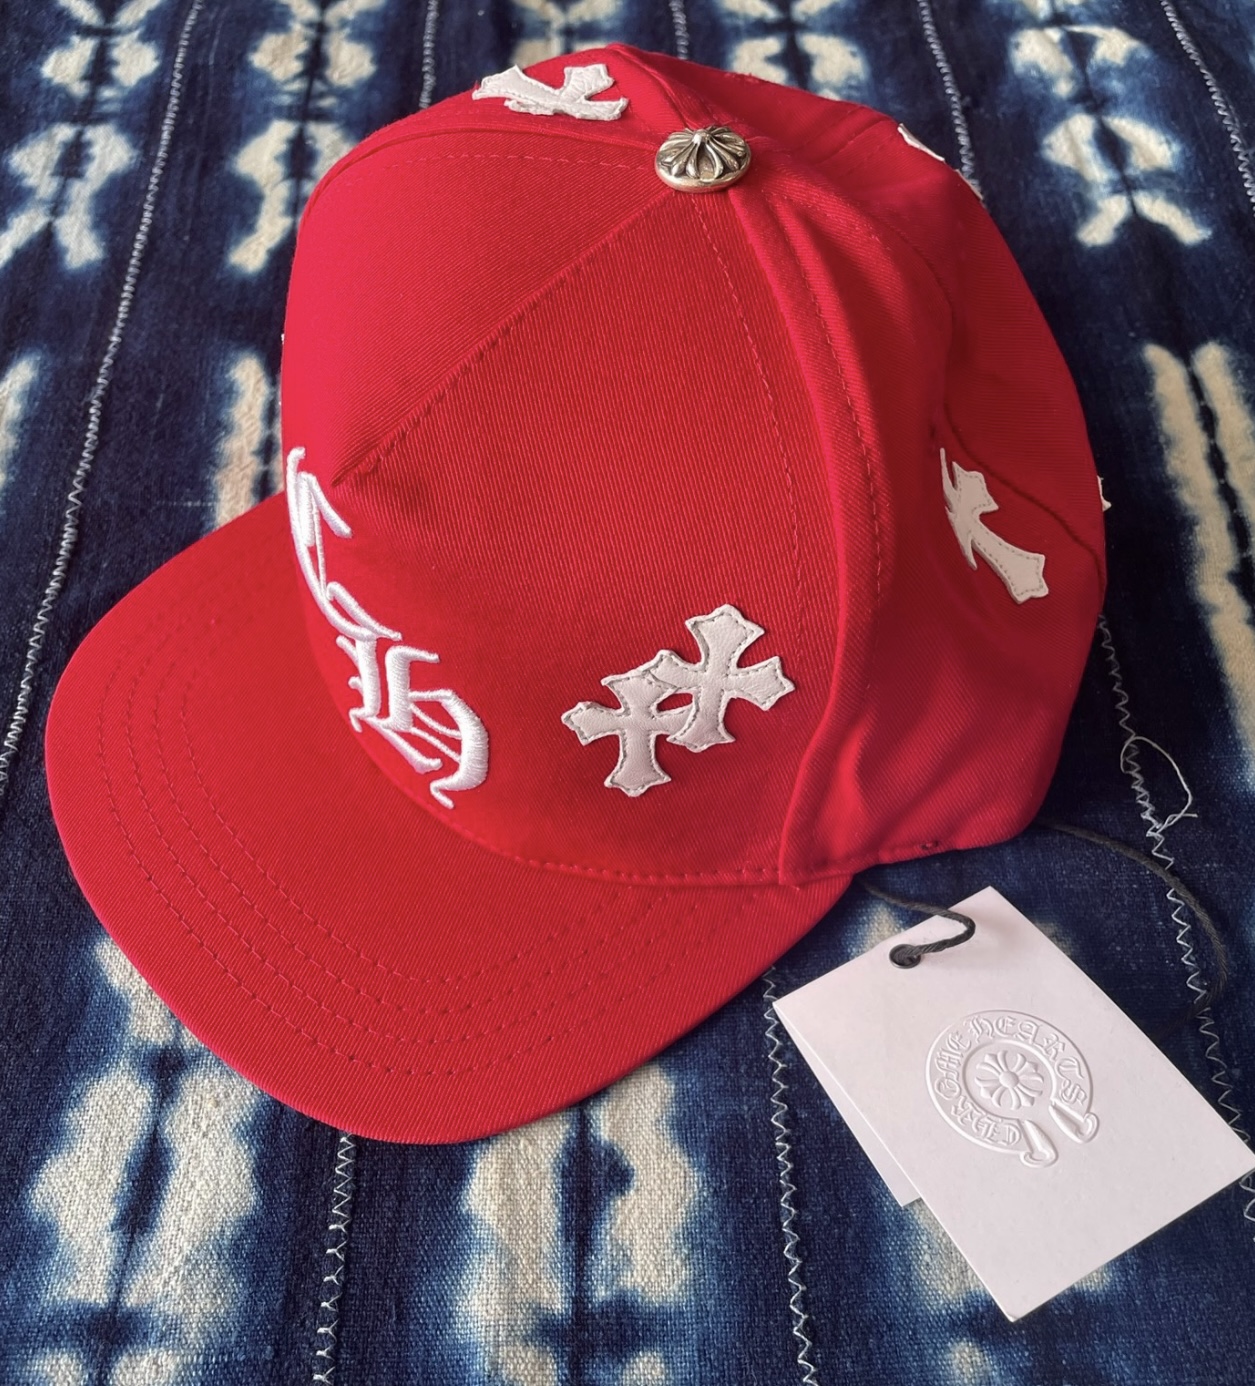 Chrome Hearts Red Cap with White Cross Patch - 1